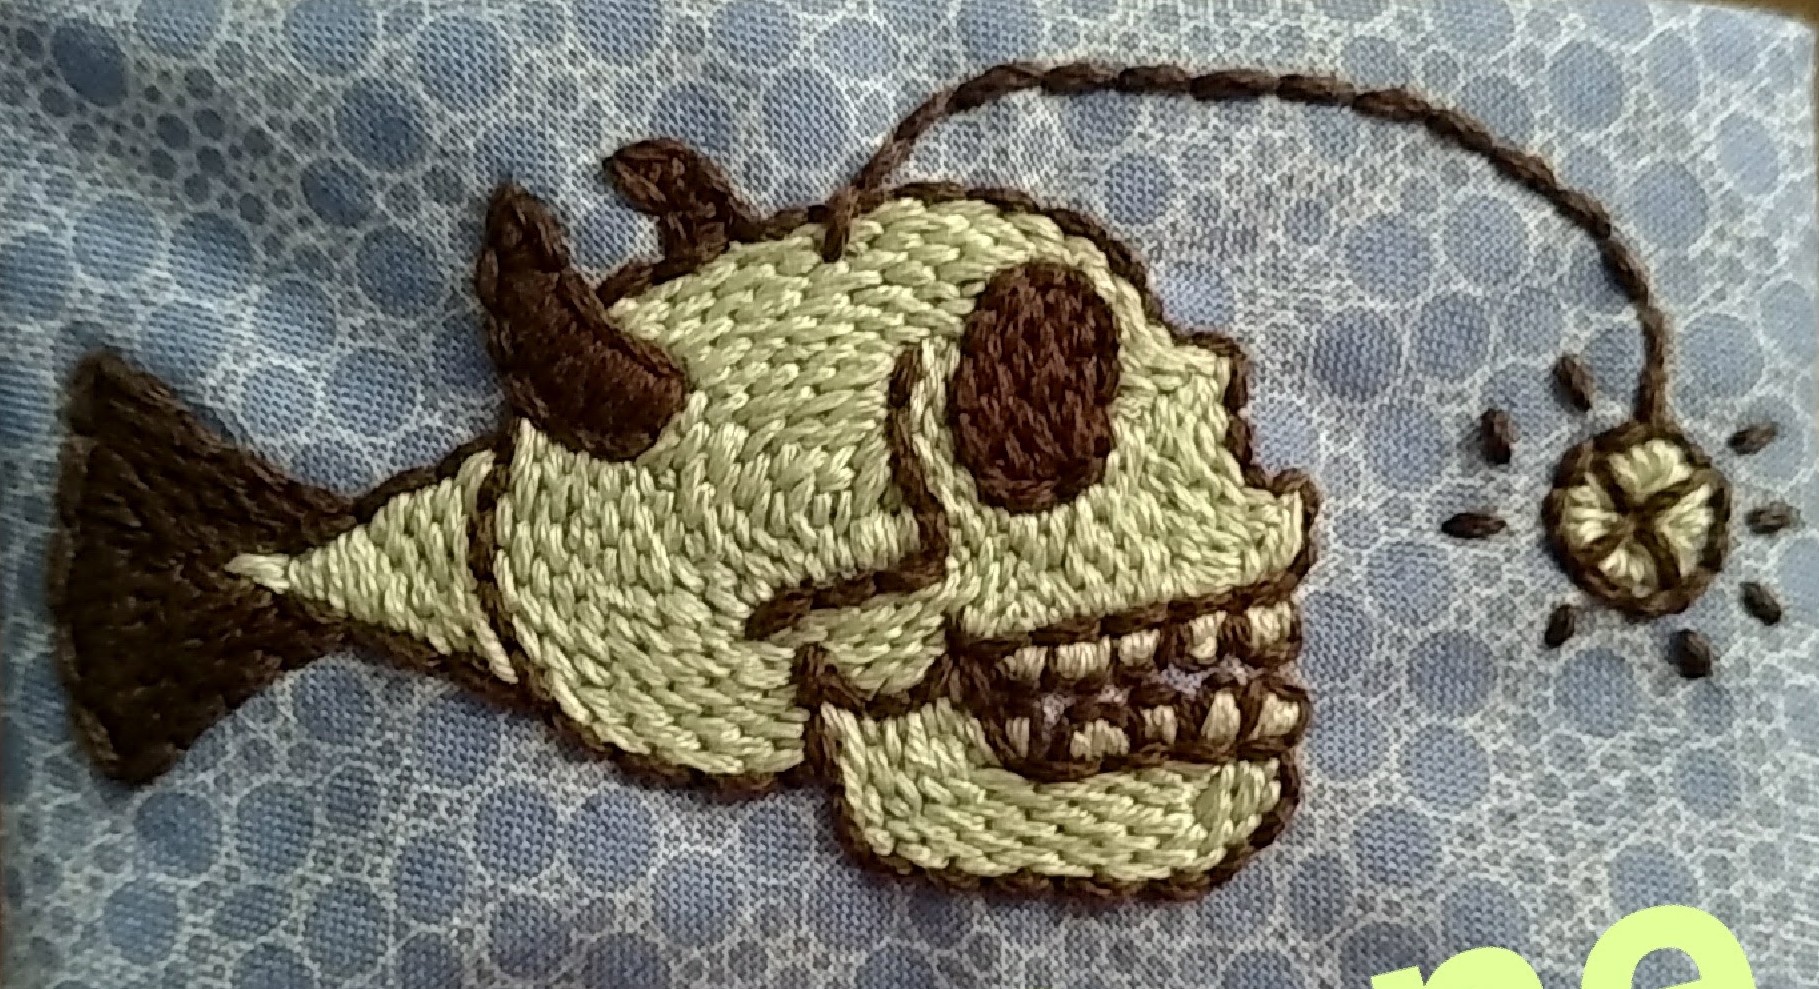 A hybrid of a human skull and an angler fish. It has horns, a fish tail, and a glowing lure that shines in front of it. It is desnsely stitched in a brick-like pattern that follows the contours of the skull, and sits against a fabric with a bubble background.